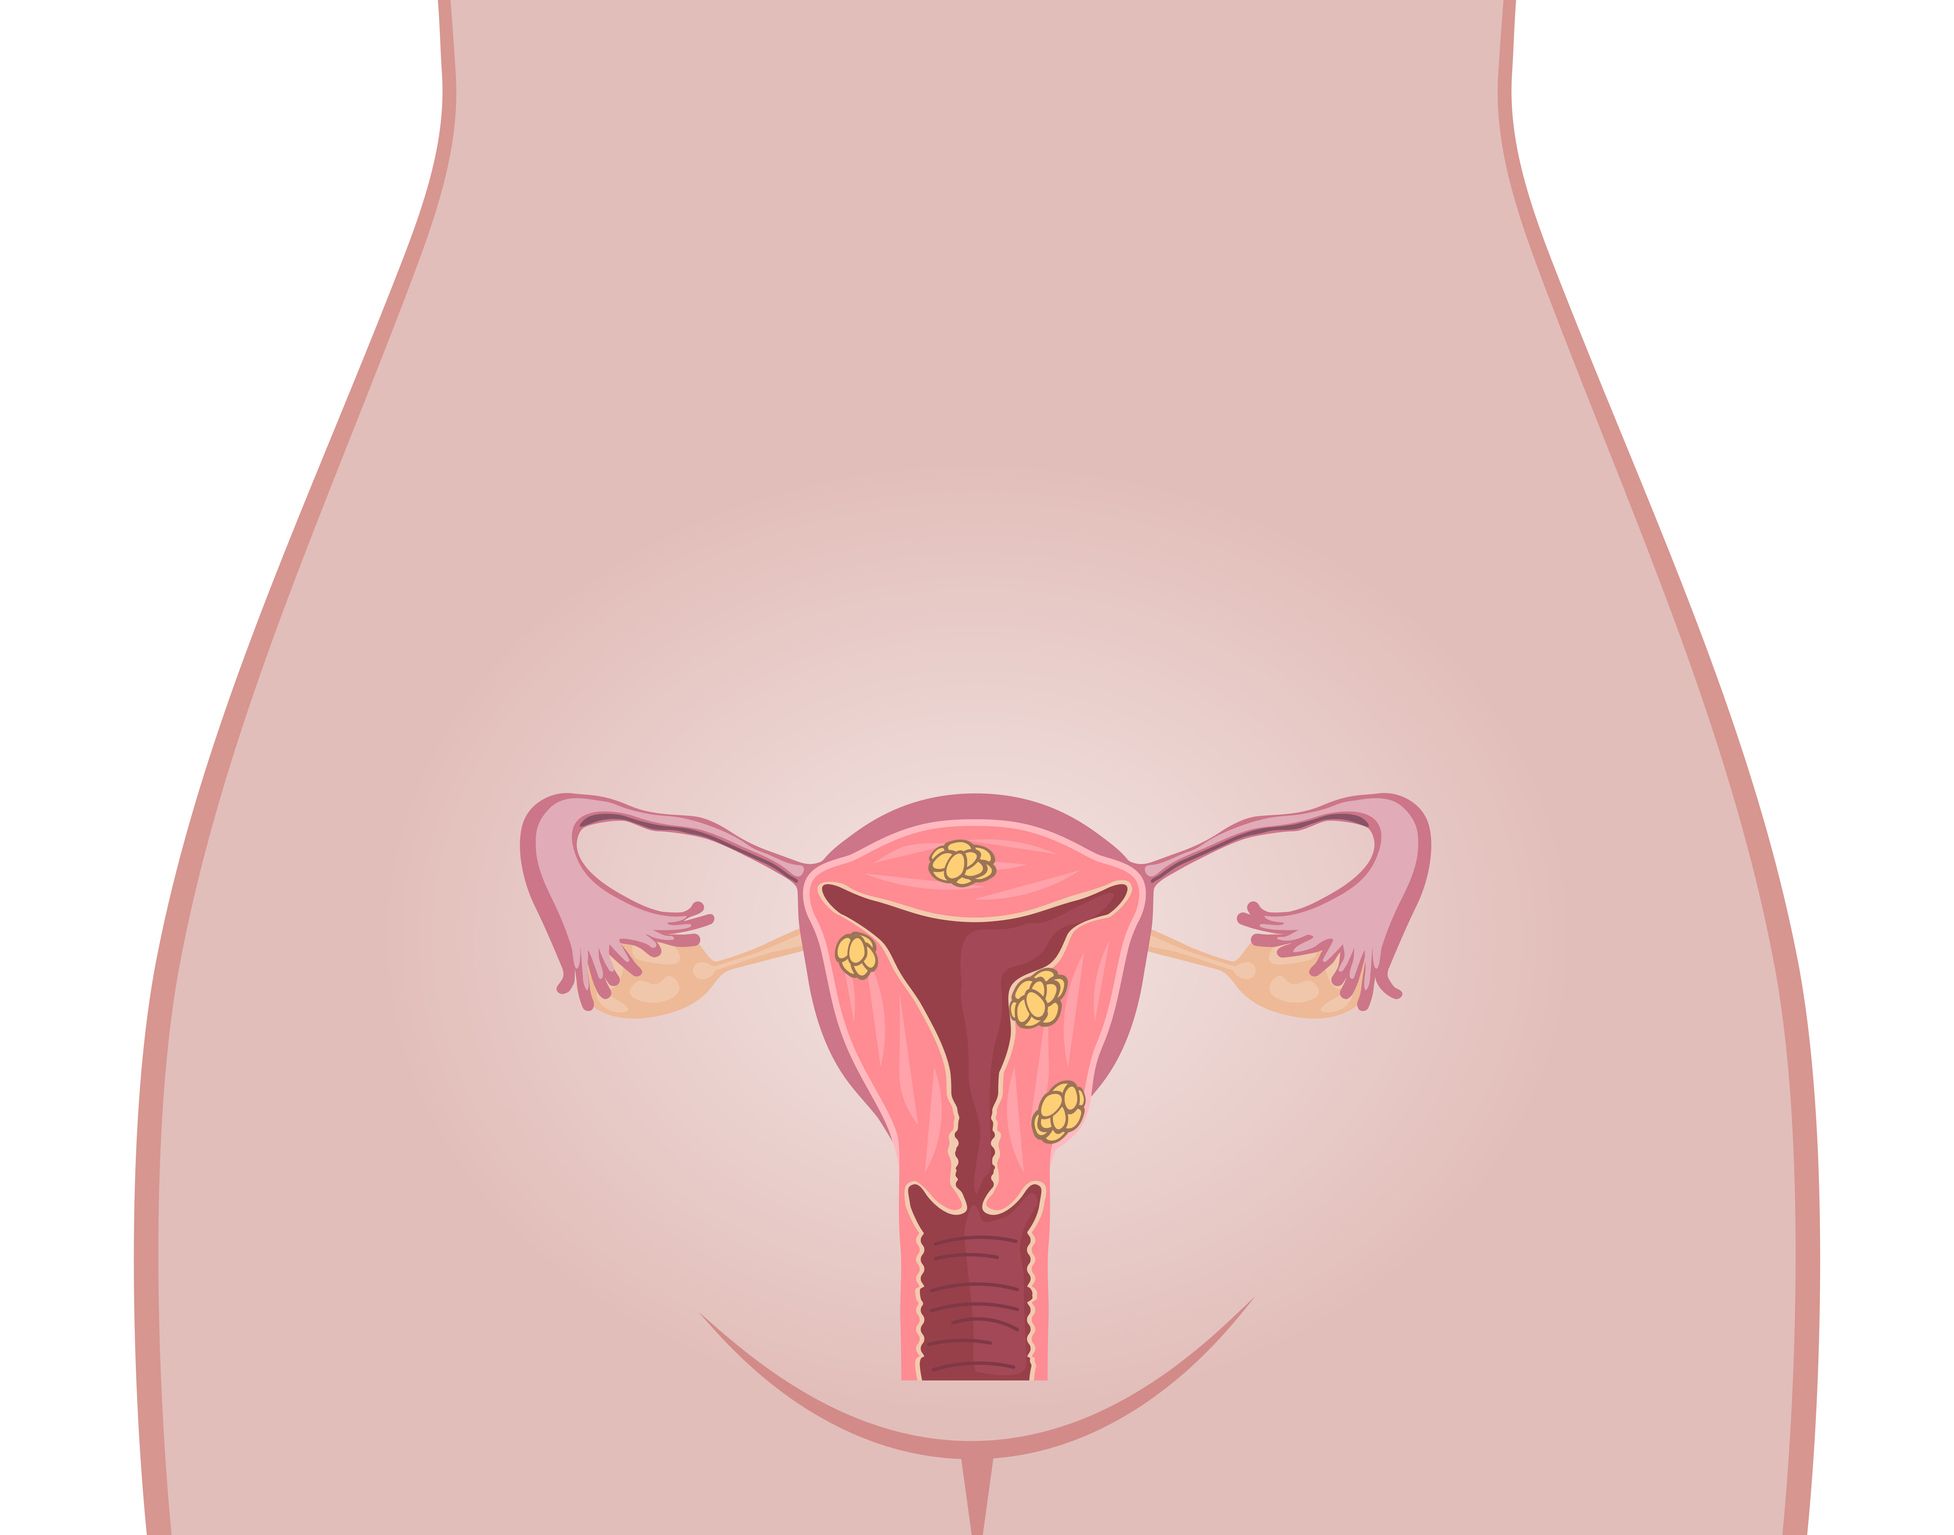 Fibroids Everything You Need To Know